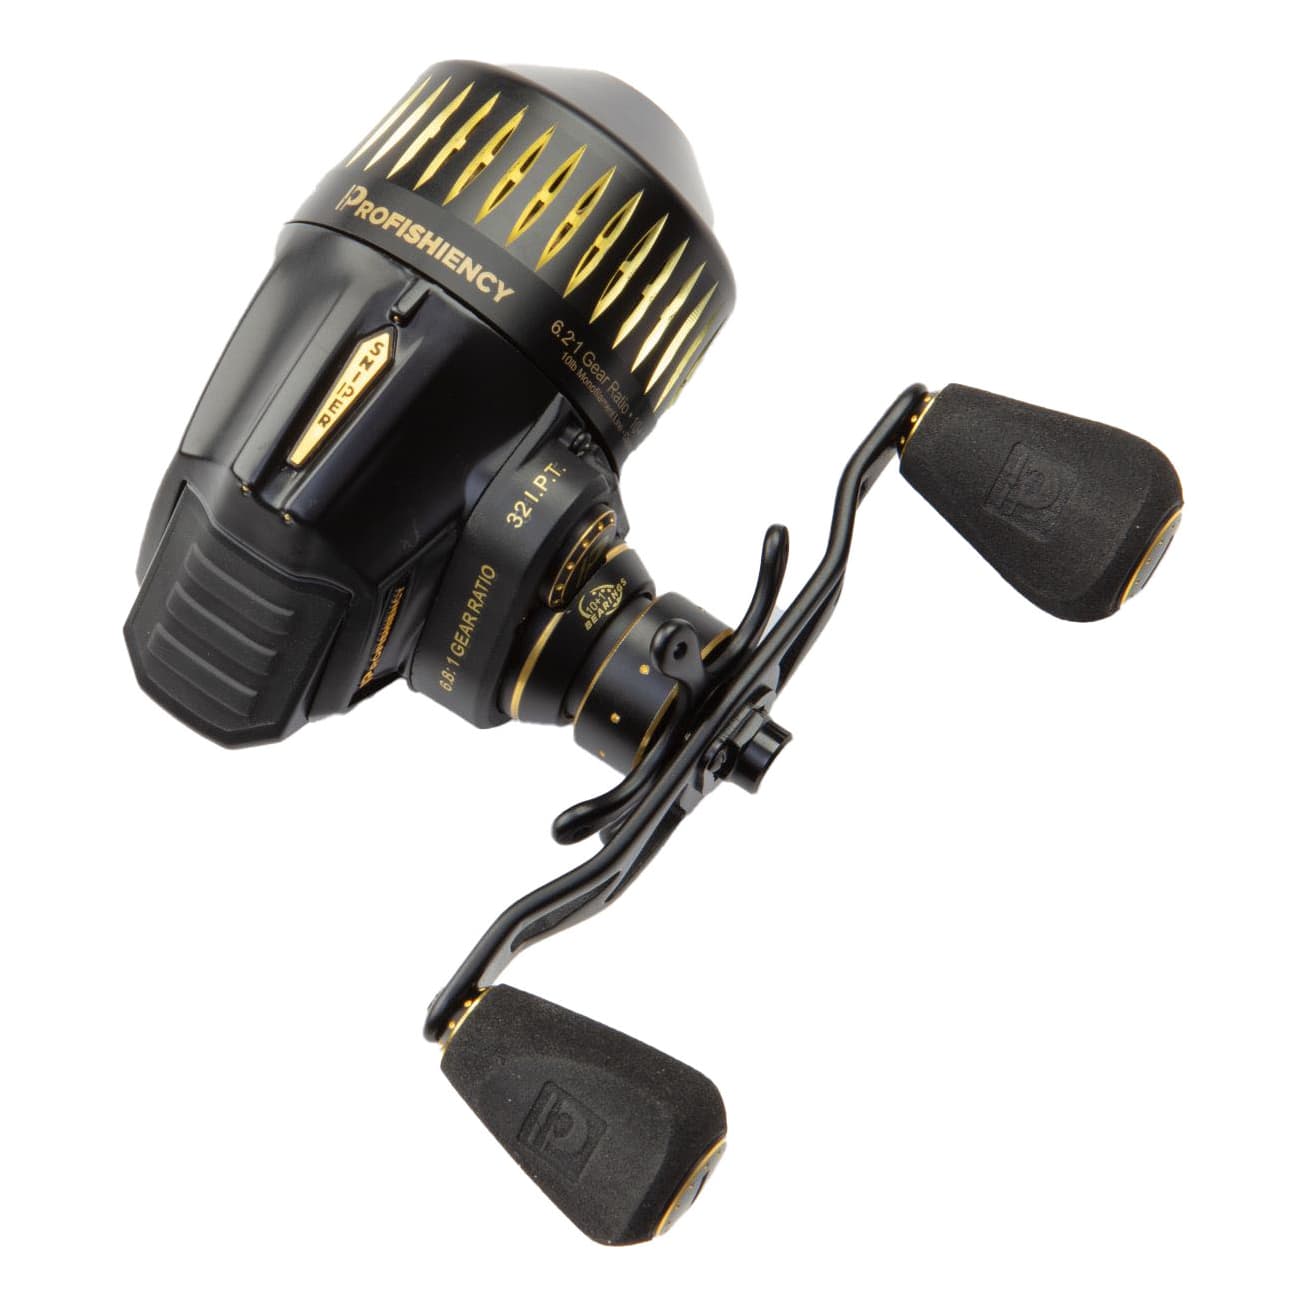 Spin-It SR 210 - The Ultimate Spincast Reel